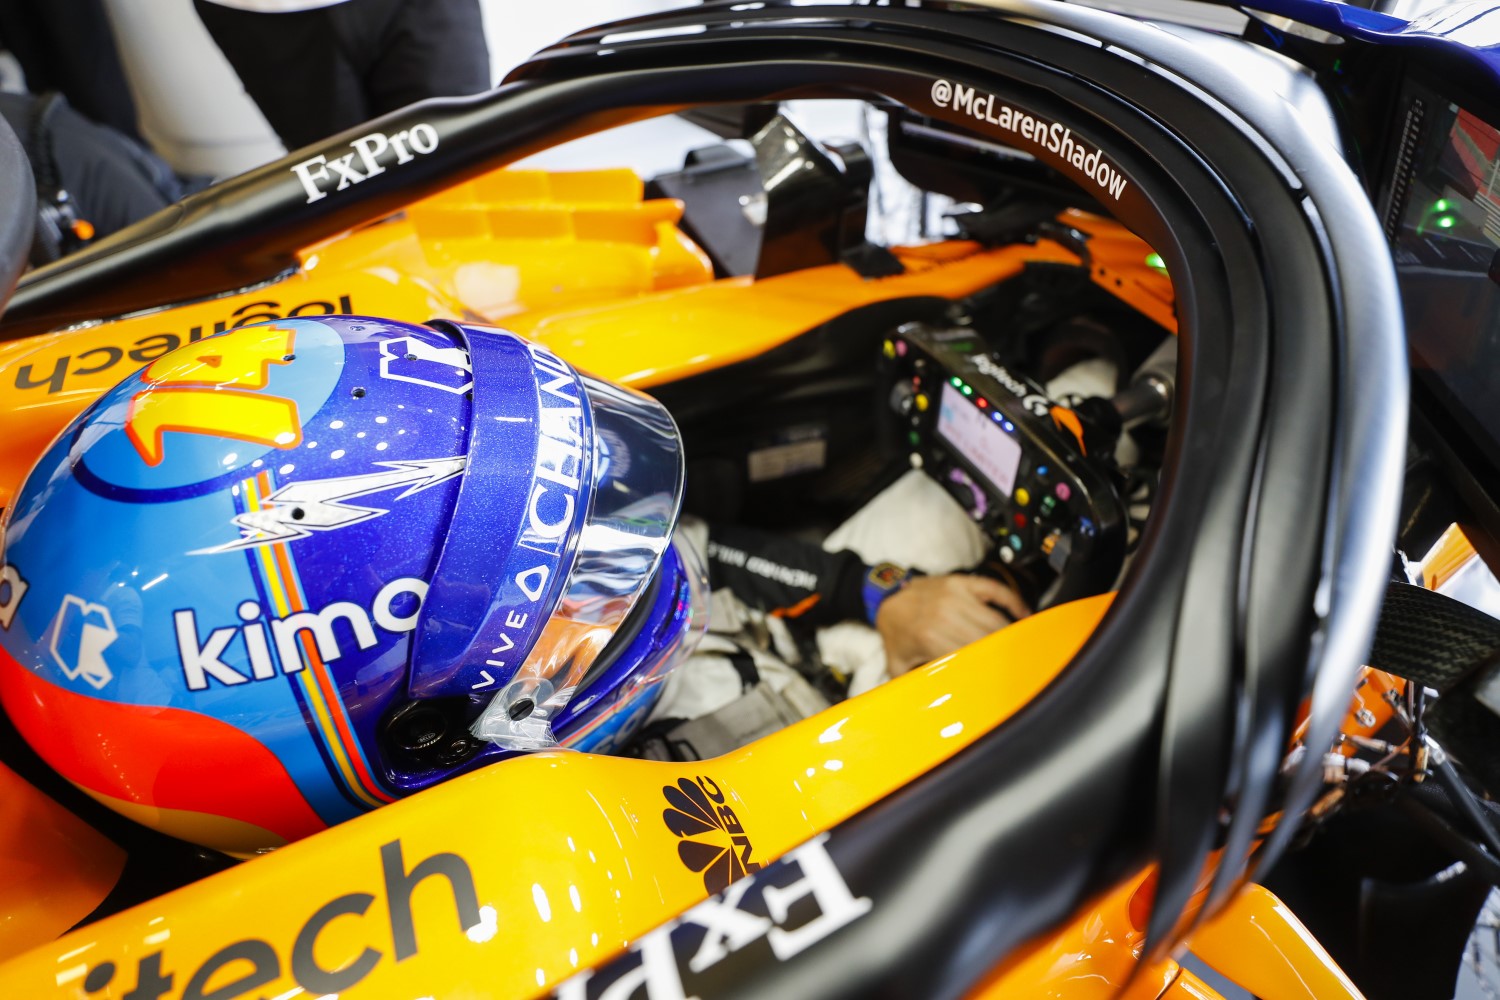 Alonso says McLaren focus already switched to 2019 car